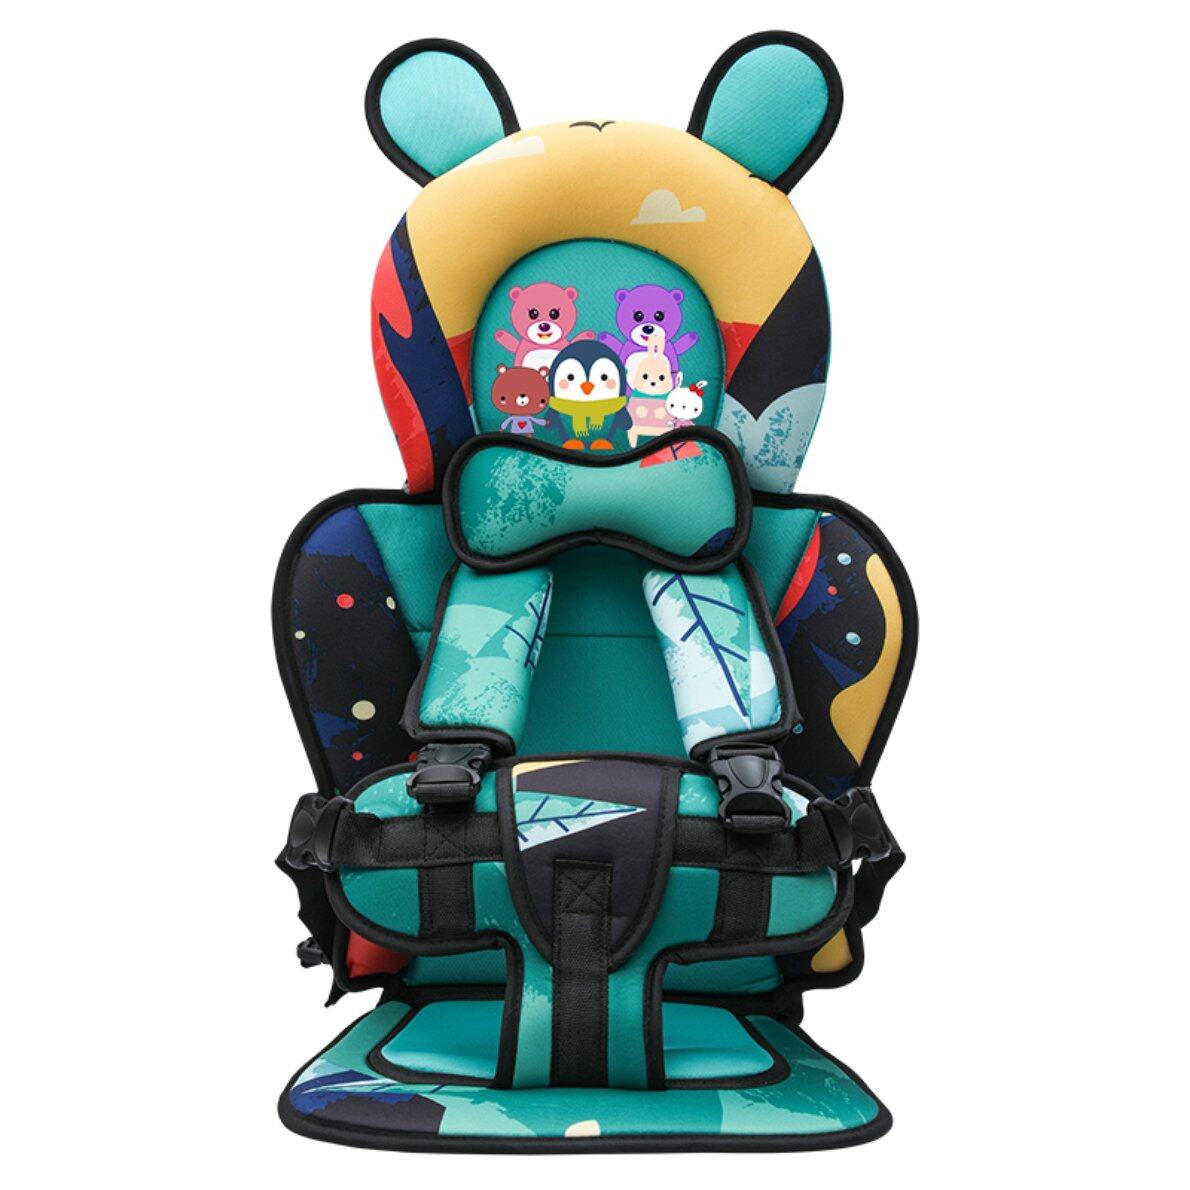 Top Sale Portable Cartoon Baby Safety Seat For Infants From 6 Months To 12 Years